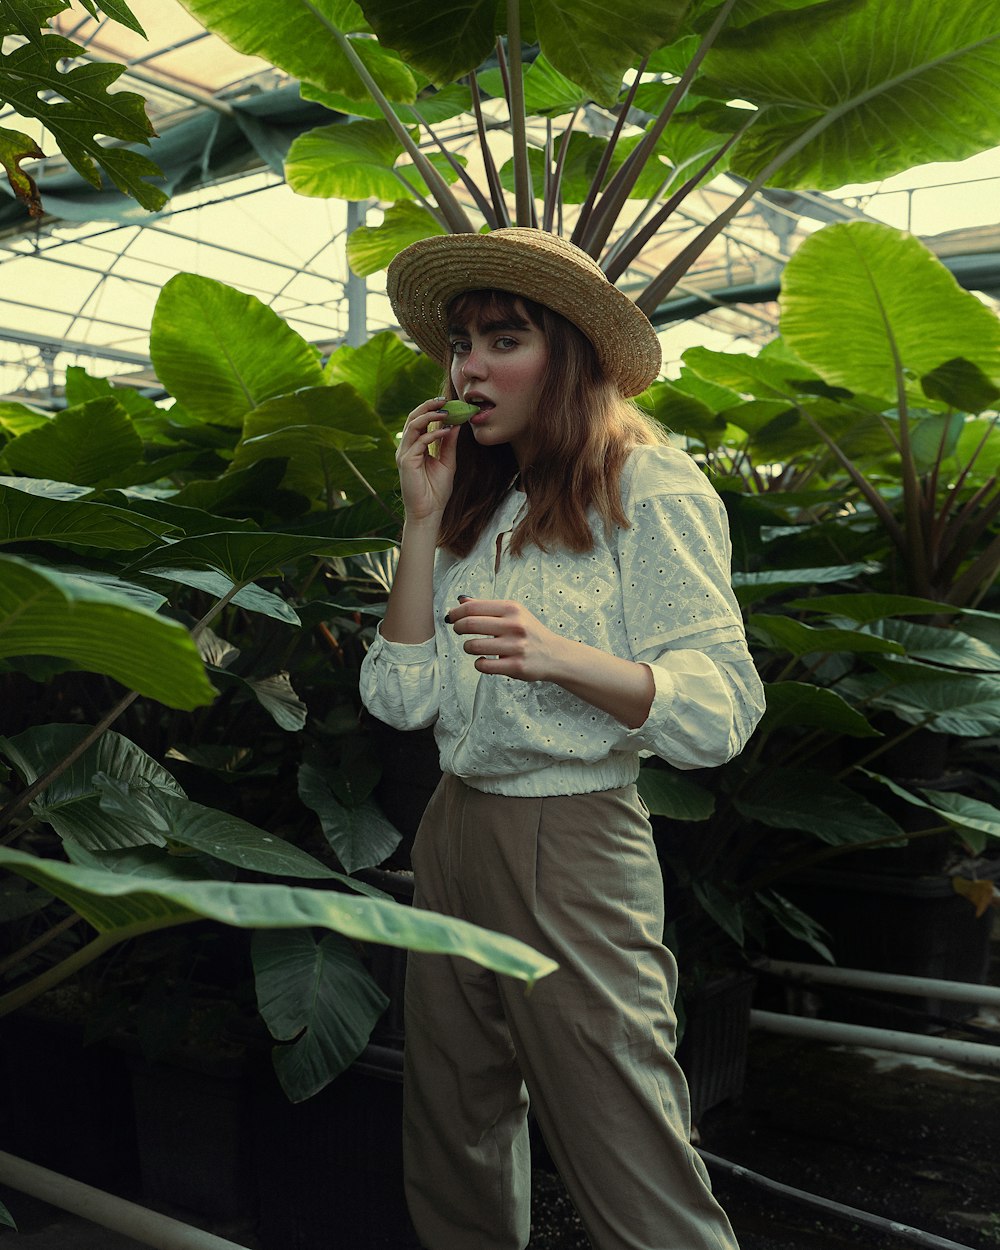 a woman standing in a greenhouse smoking a cigarette